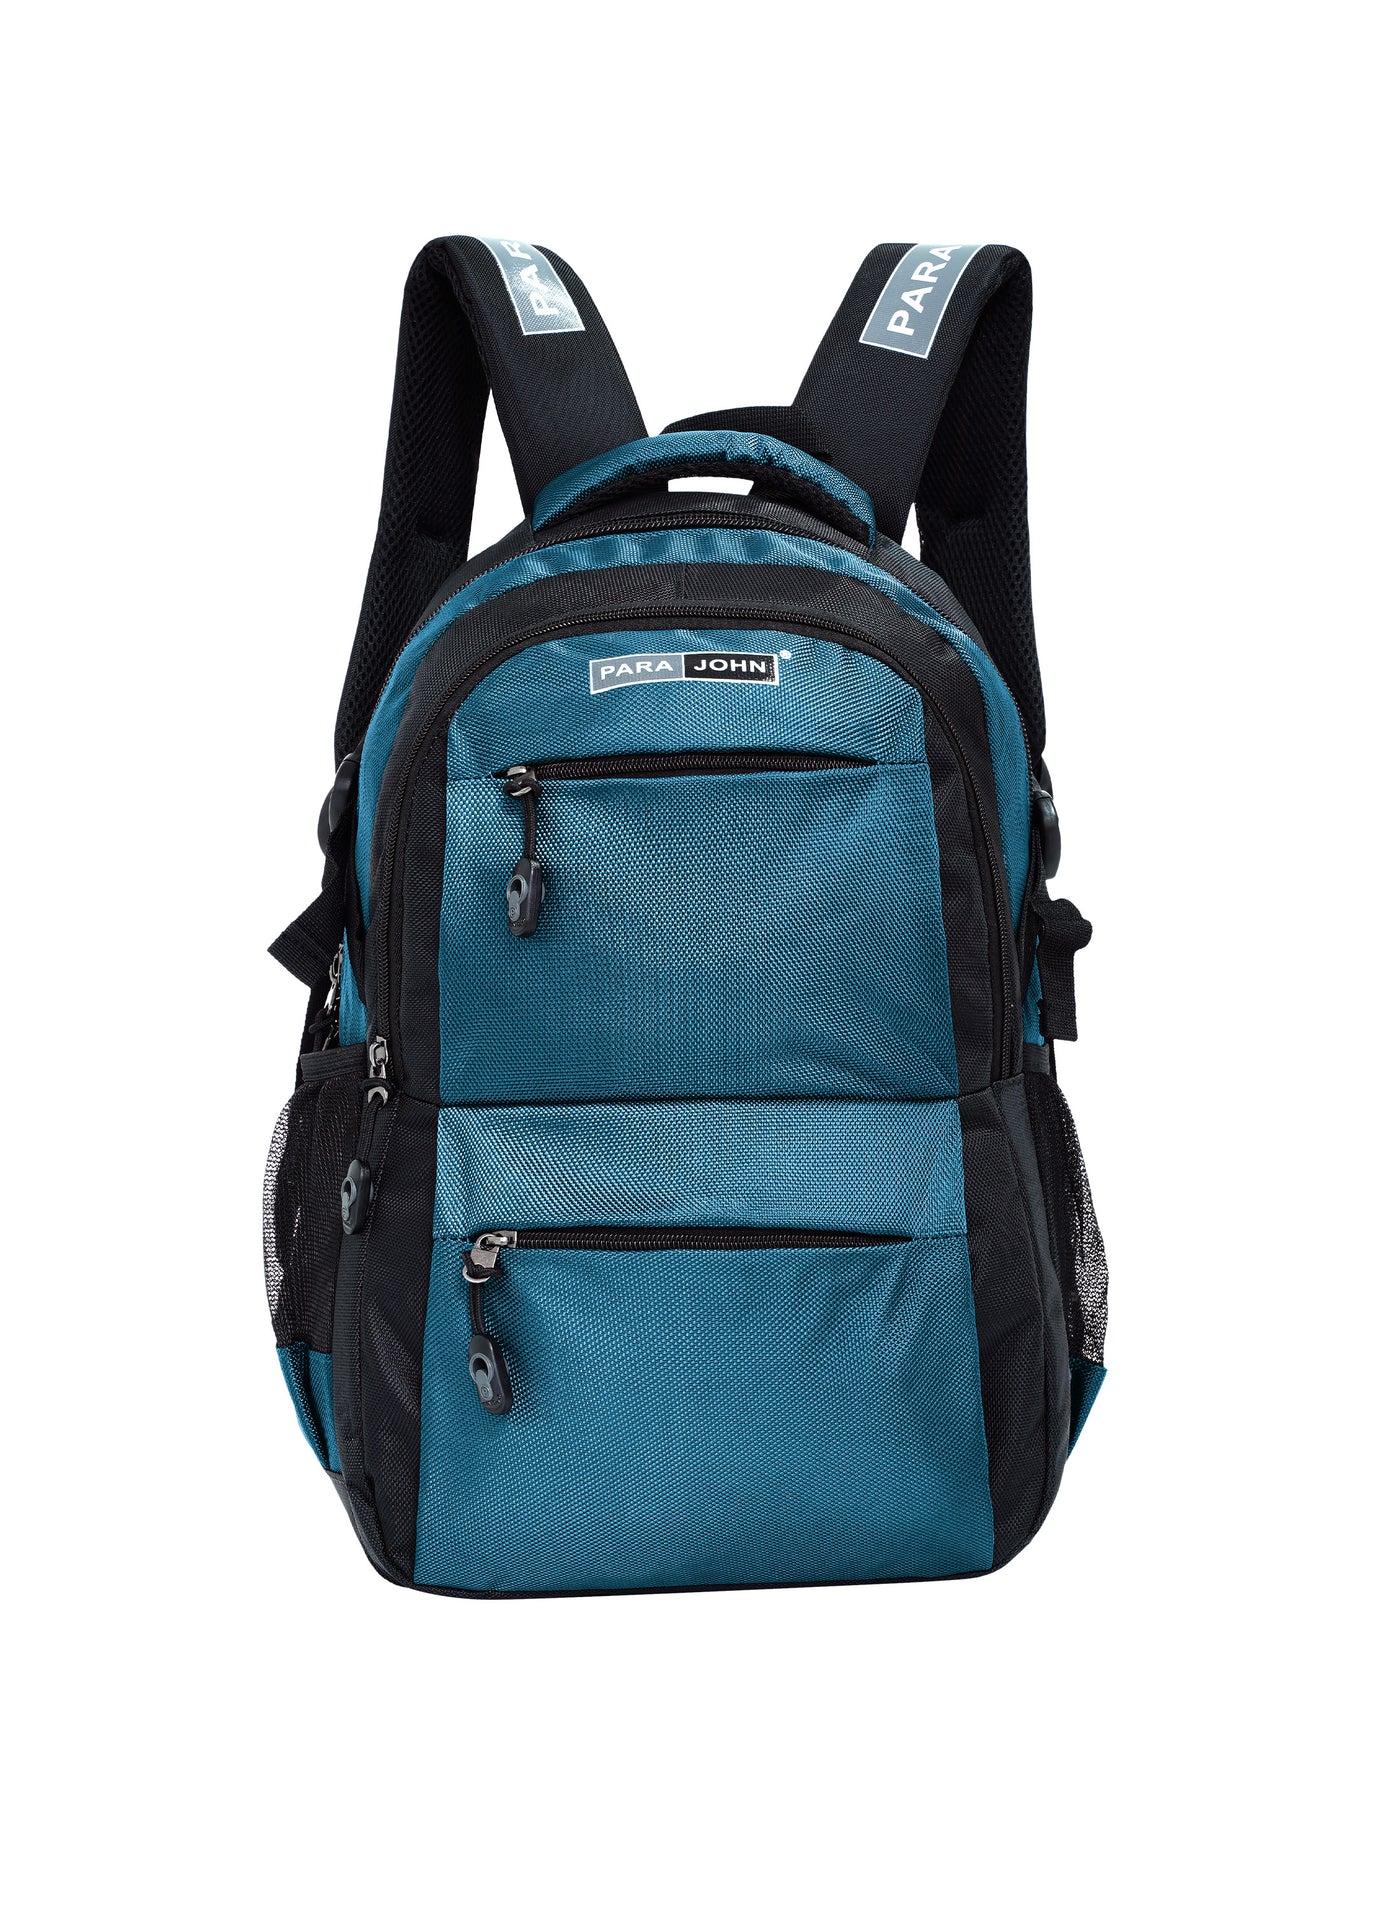 Classic Students School Backpack Blue 16 Inch